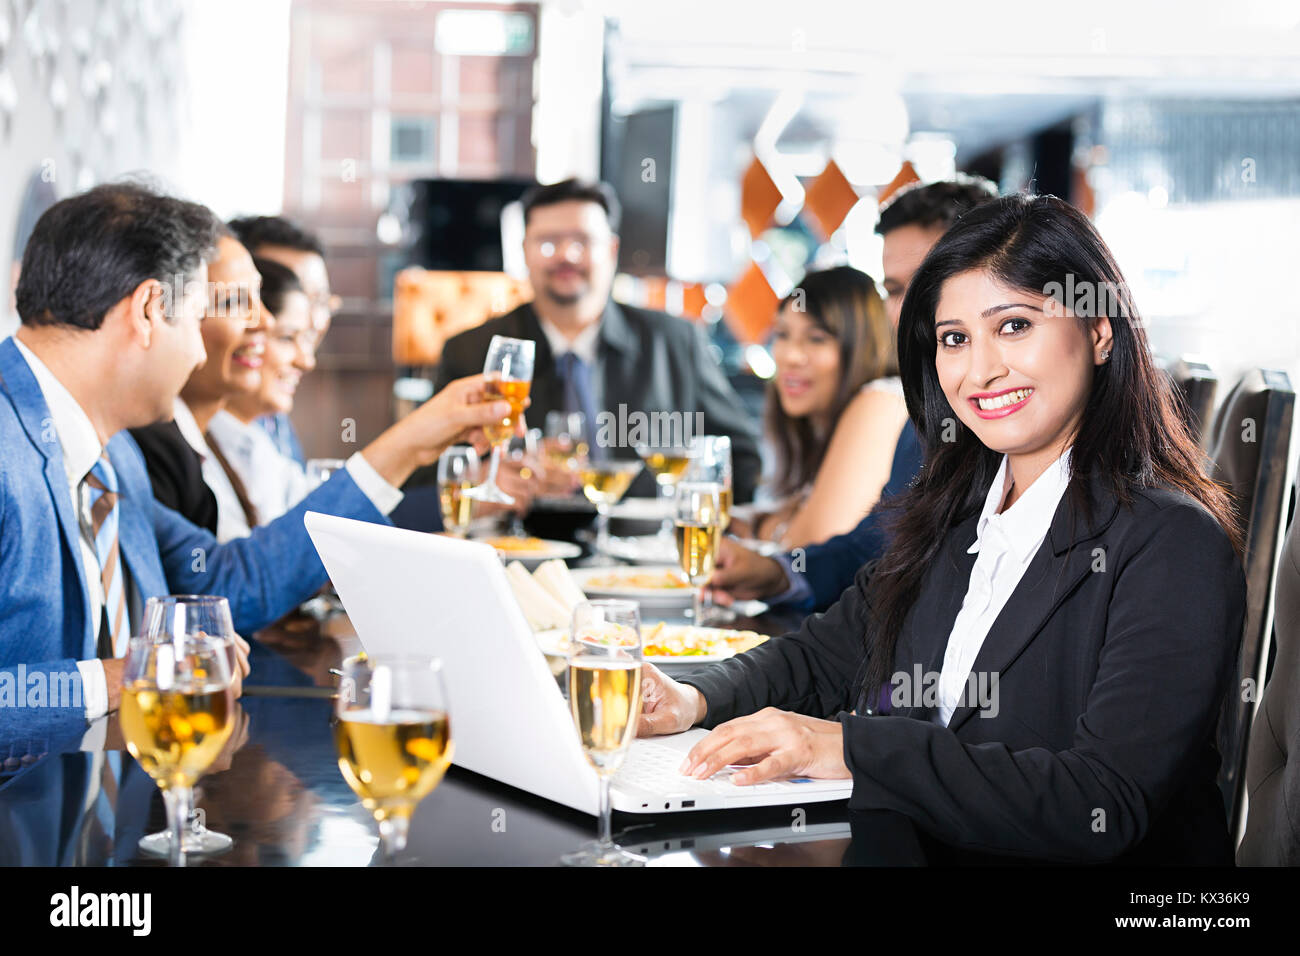 1 Business Woman Dining Table laptop Working With colleagues Restaurant -Party Stock Photo